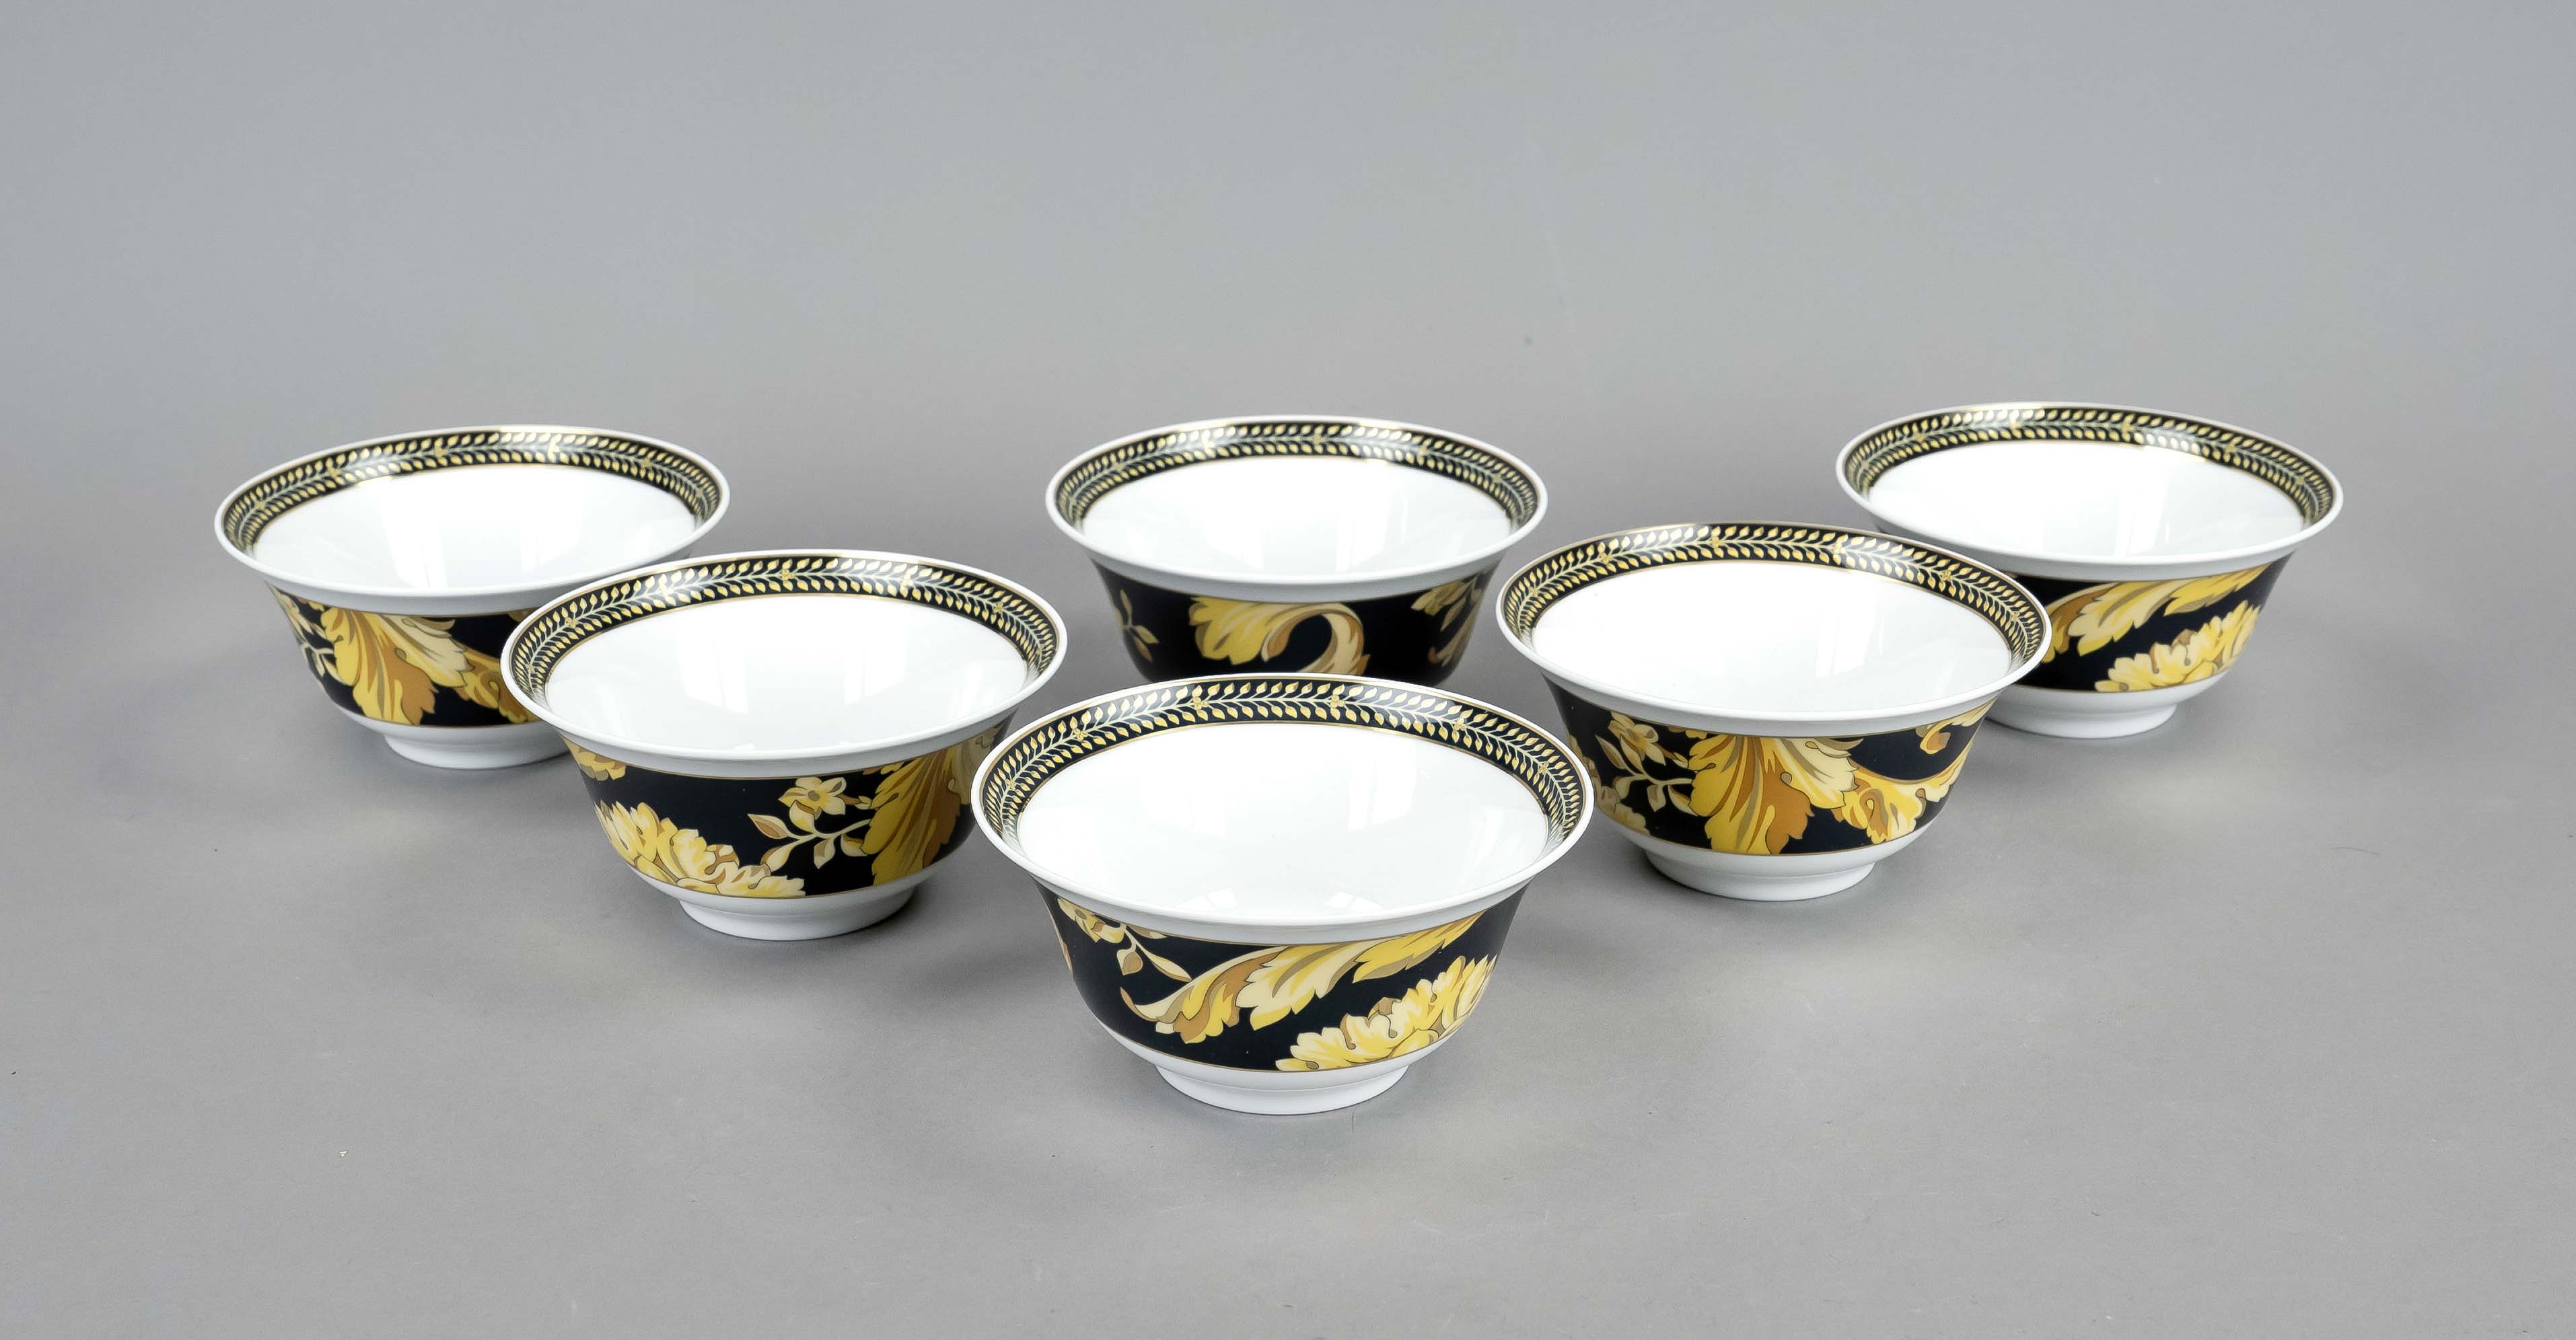 Six small bowls, Rosenthal meets Versace, late 20th century, 2nd choice, 'Vanity' series, stylized